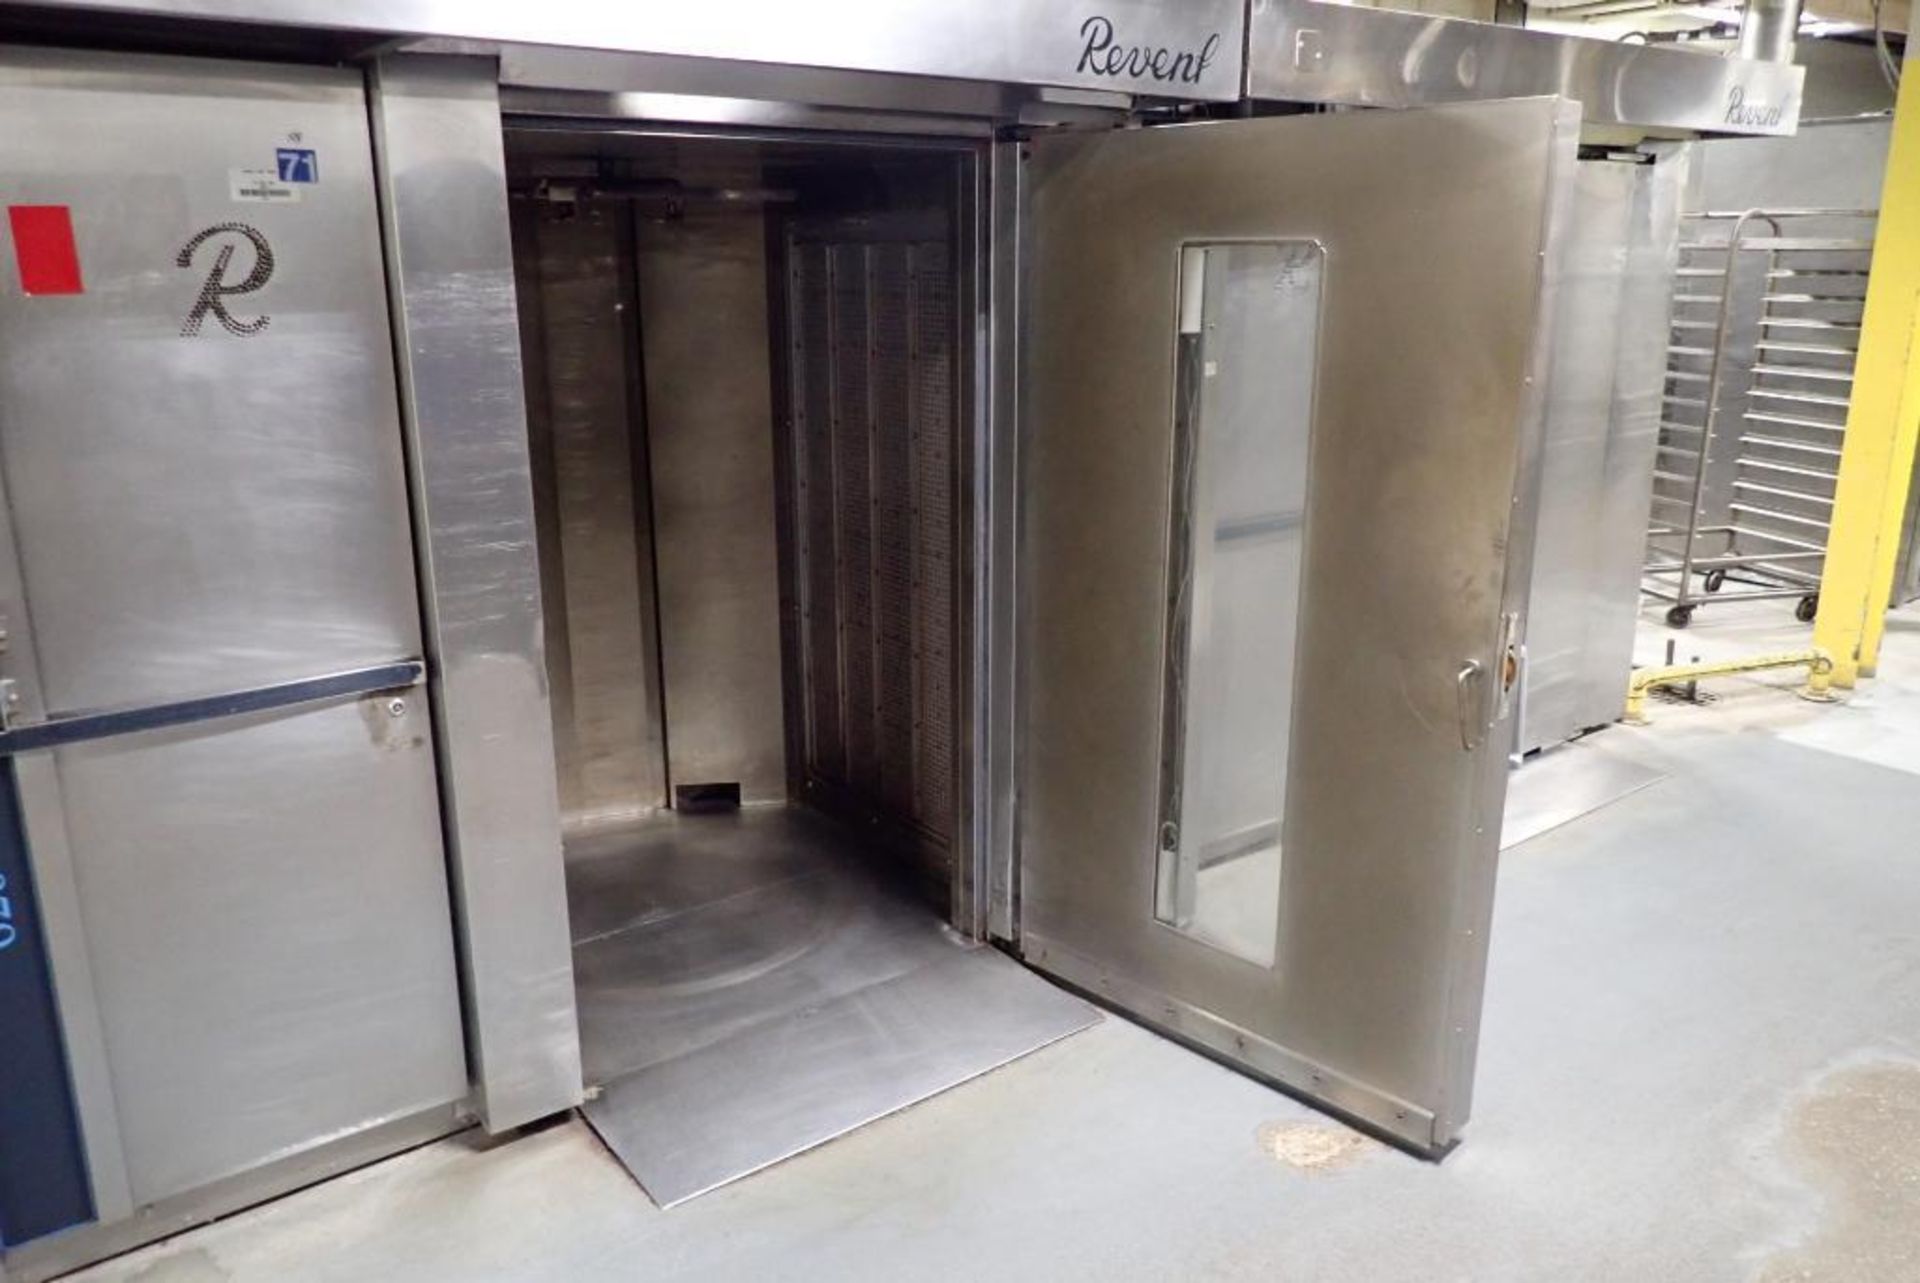 Revent double rack oven - Image 3 of 13